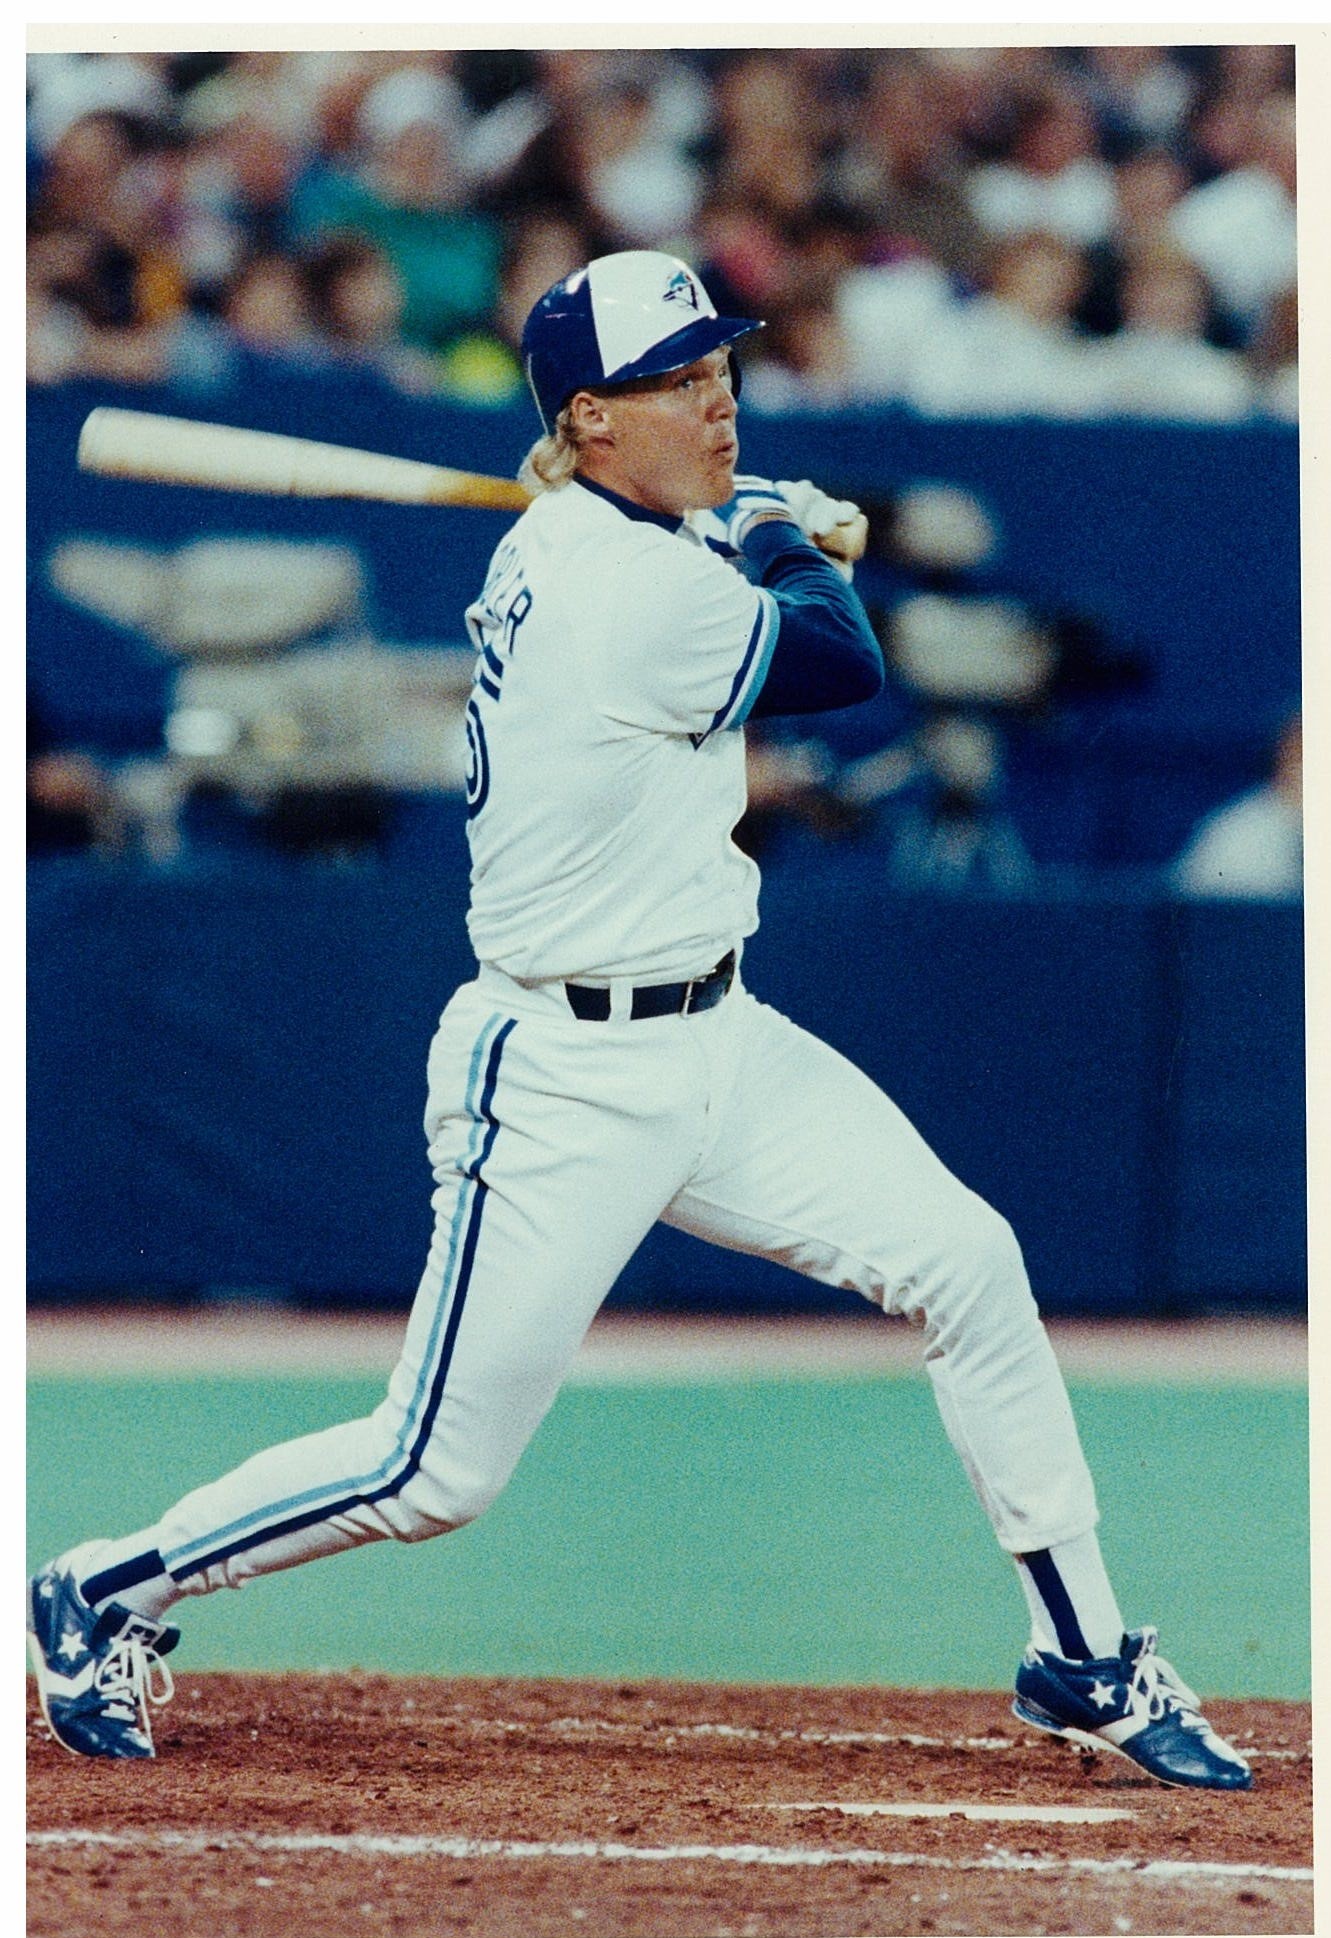 25 Years Ago, Alomar's Home Run Changed Everything for the Blue